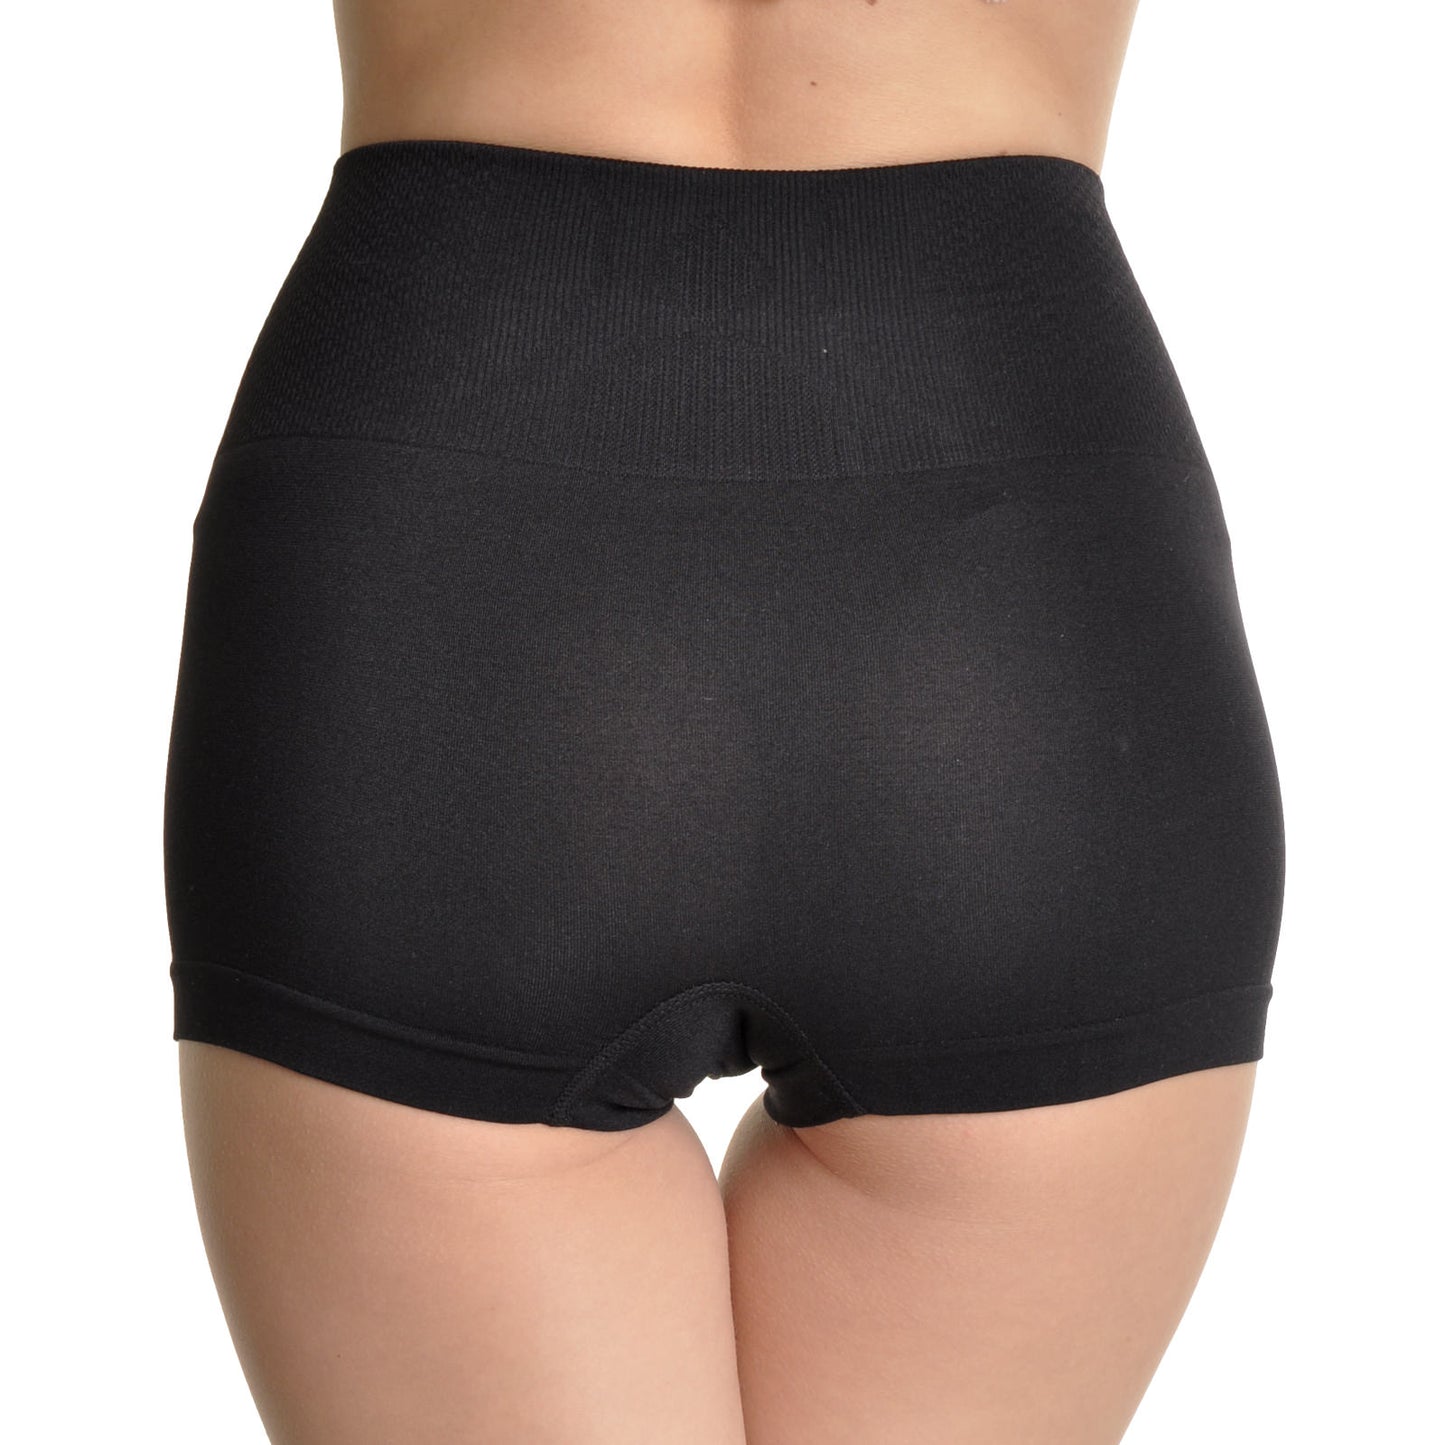 Women's Seamless Boxers with High Waist Control Top (6-Pack)